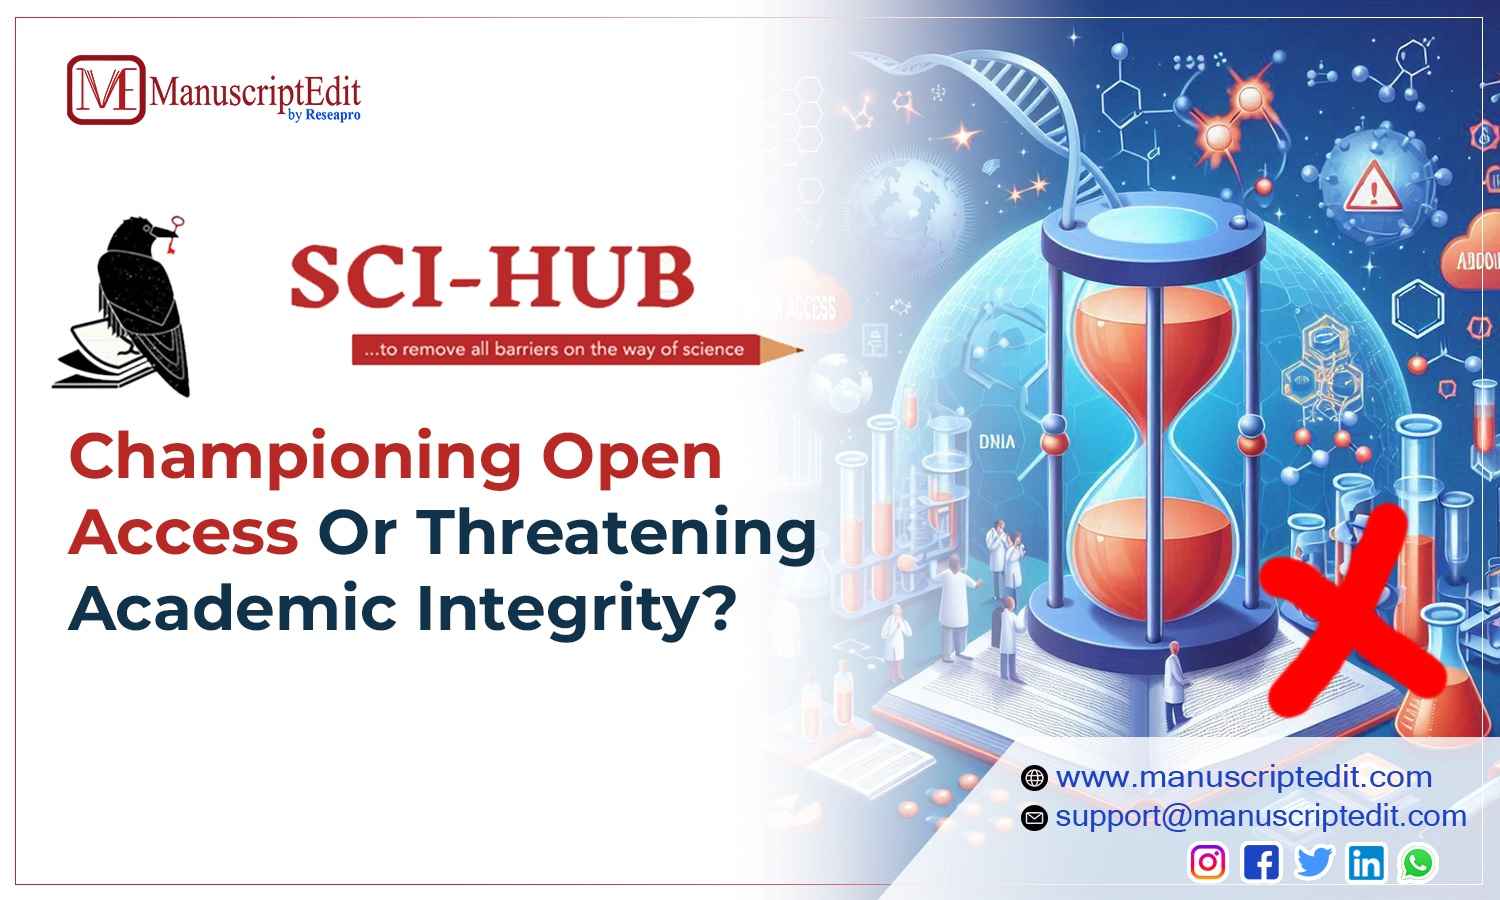 Sci-hub: Championing Open Access Or Threatening Academic Integrity?